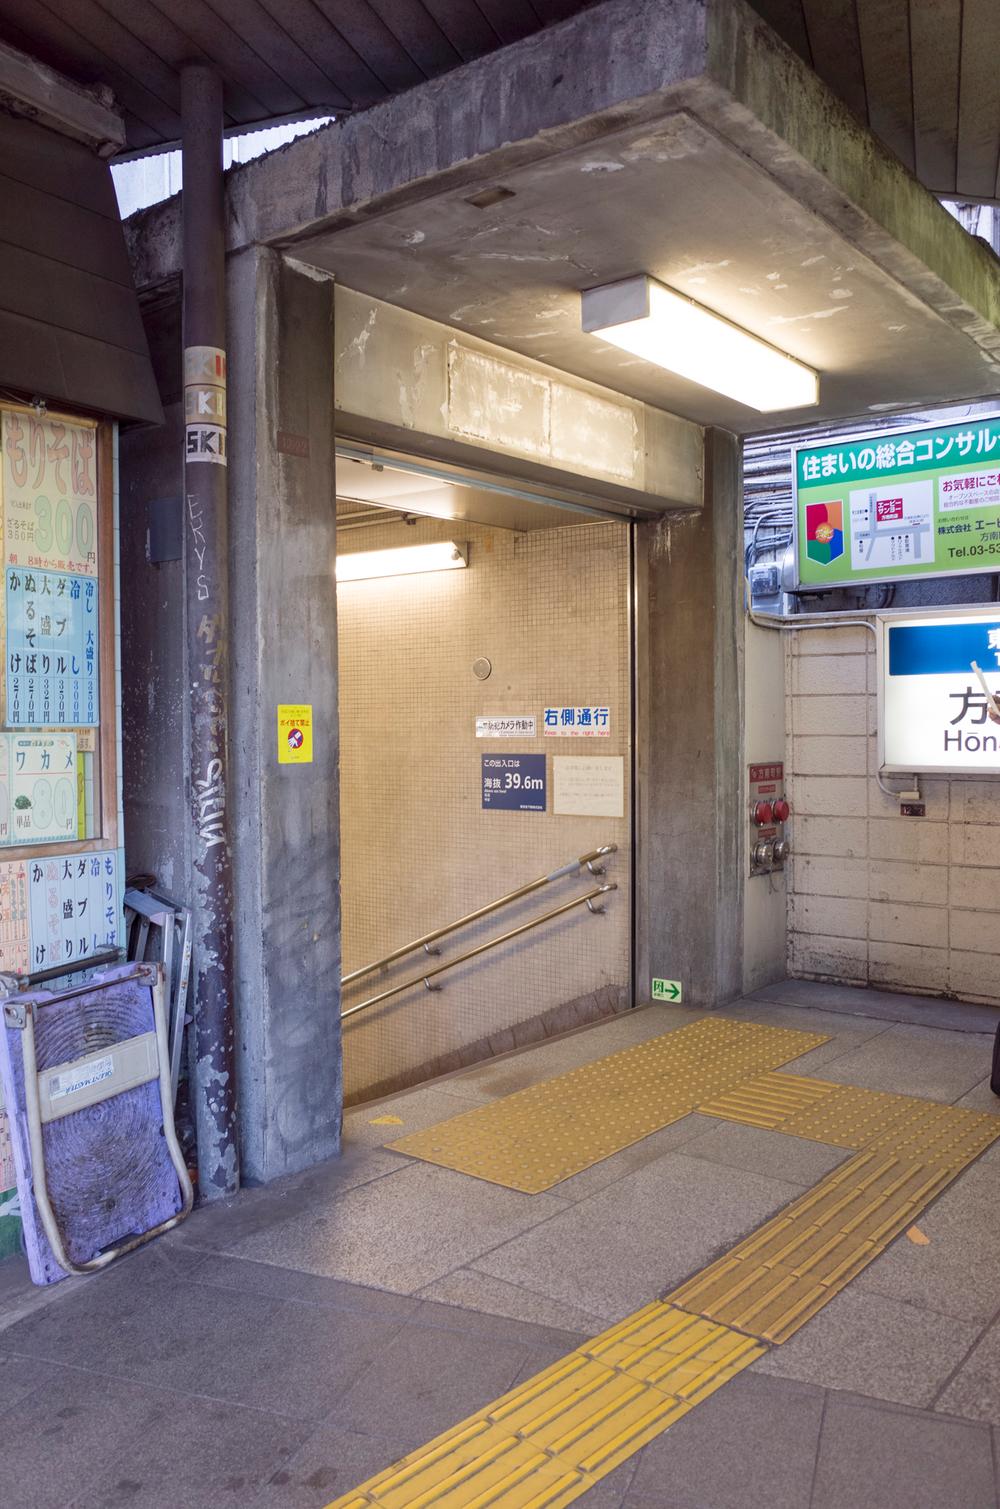 Other. 650m to "Honancho" station (8 minutes)